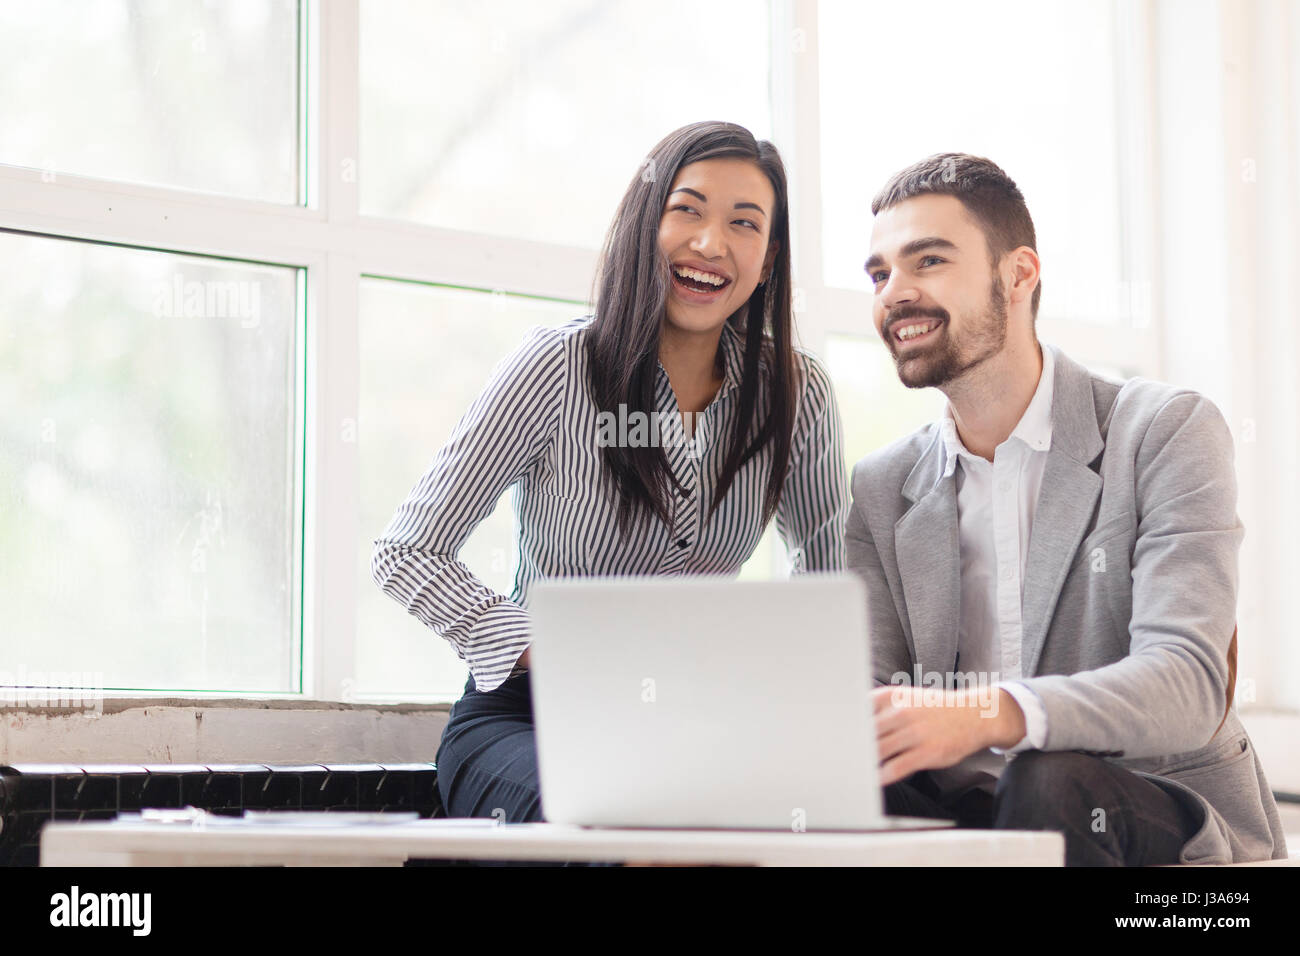 Office Workers in Good Mood Stock Photo